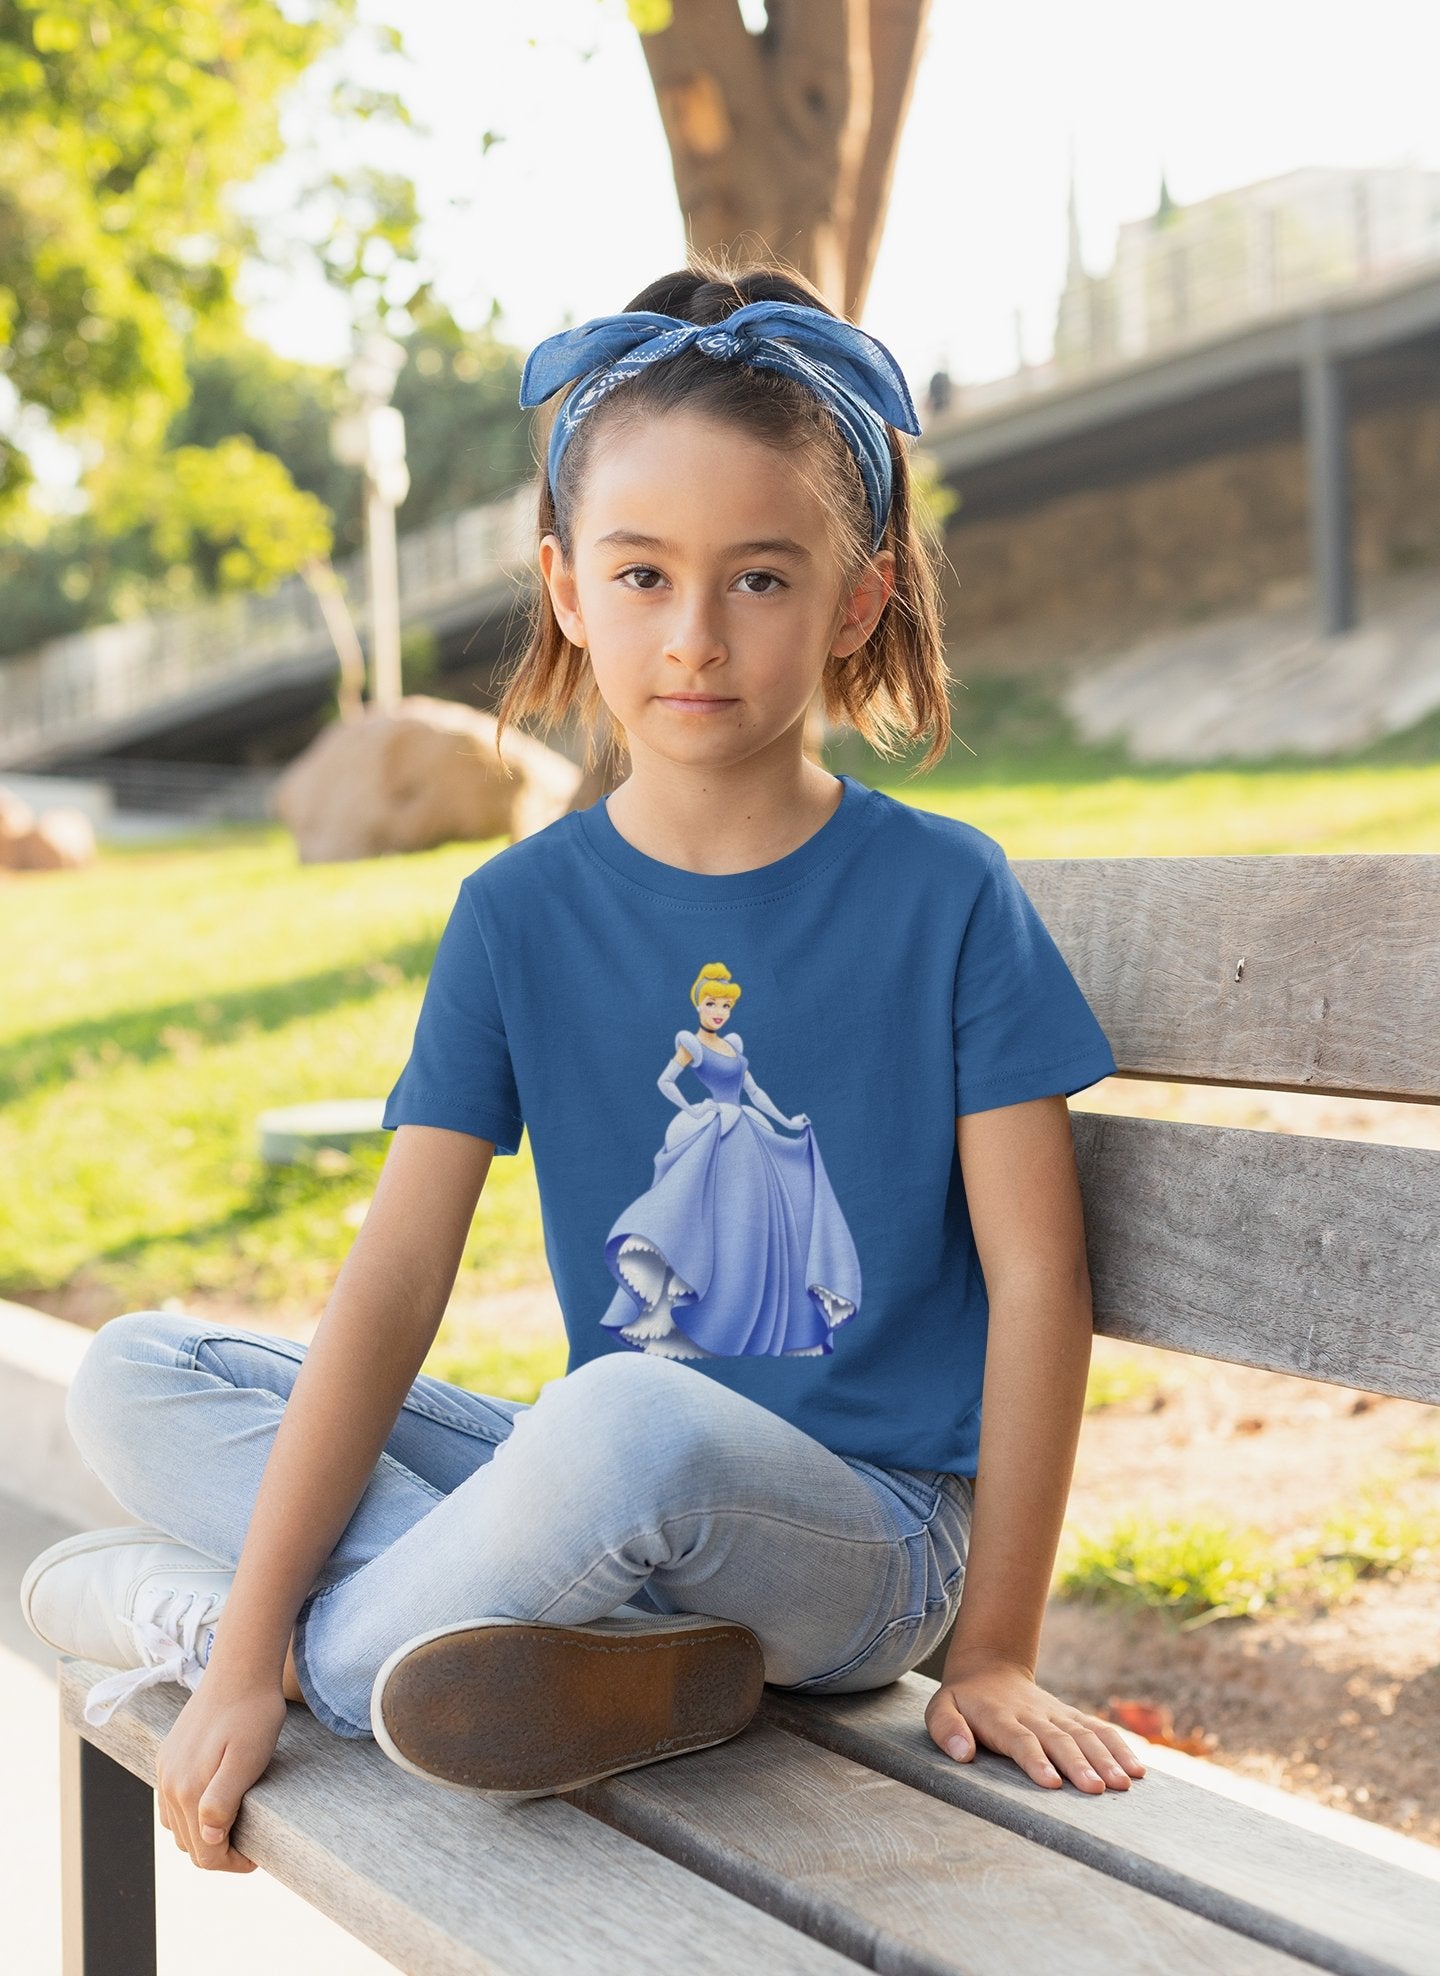 Cute Princess Half Sleeves T-Shirt For Girls -FunkyTradition - FunkyTradition